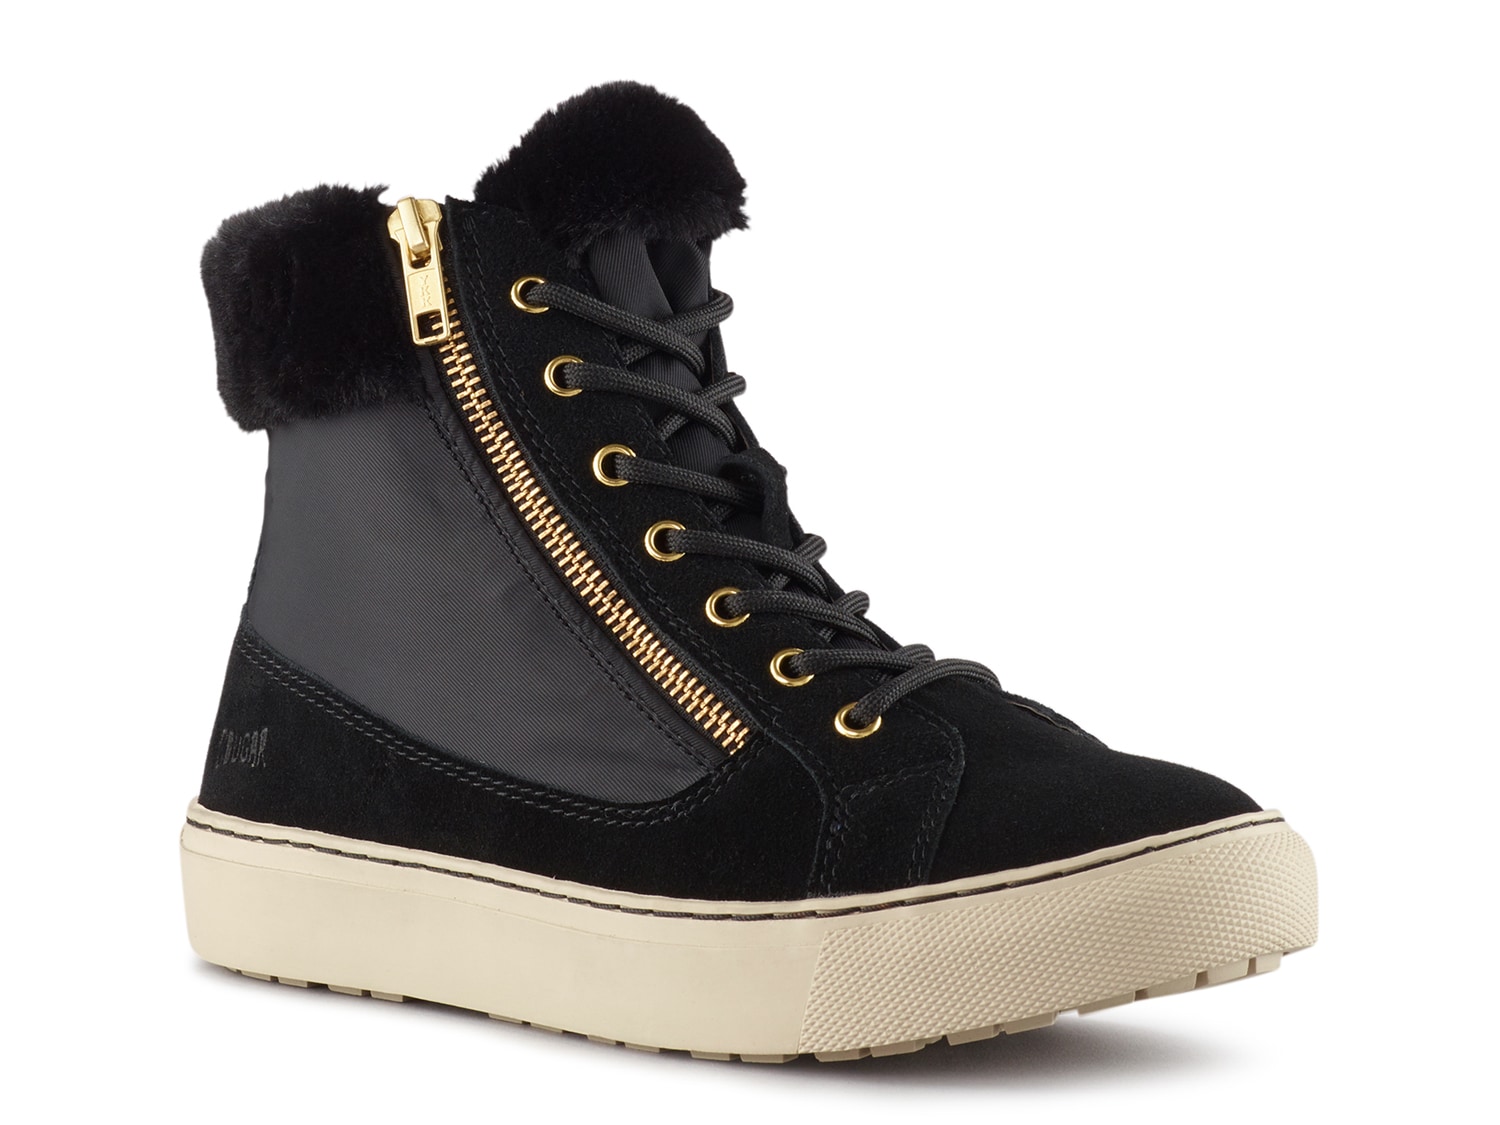 Cougar Dublin Snow Boot - Free Shipping | DSW